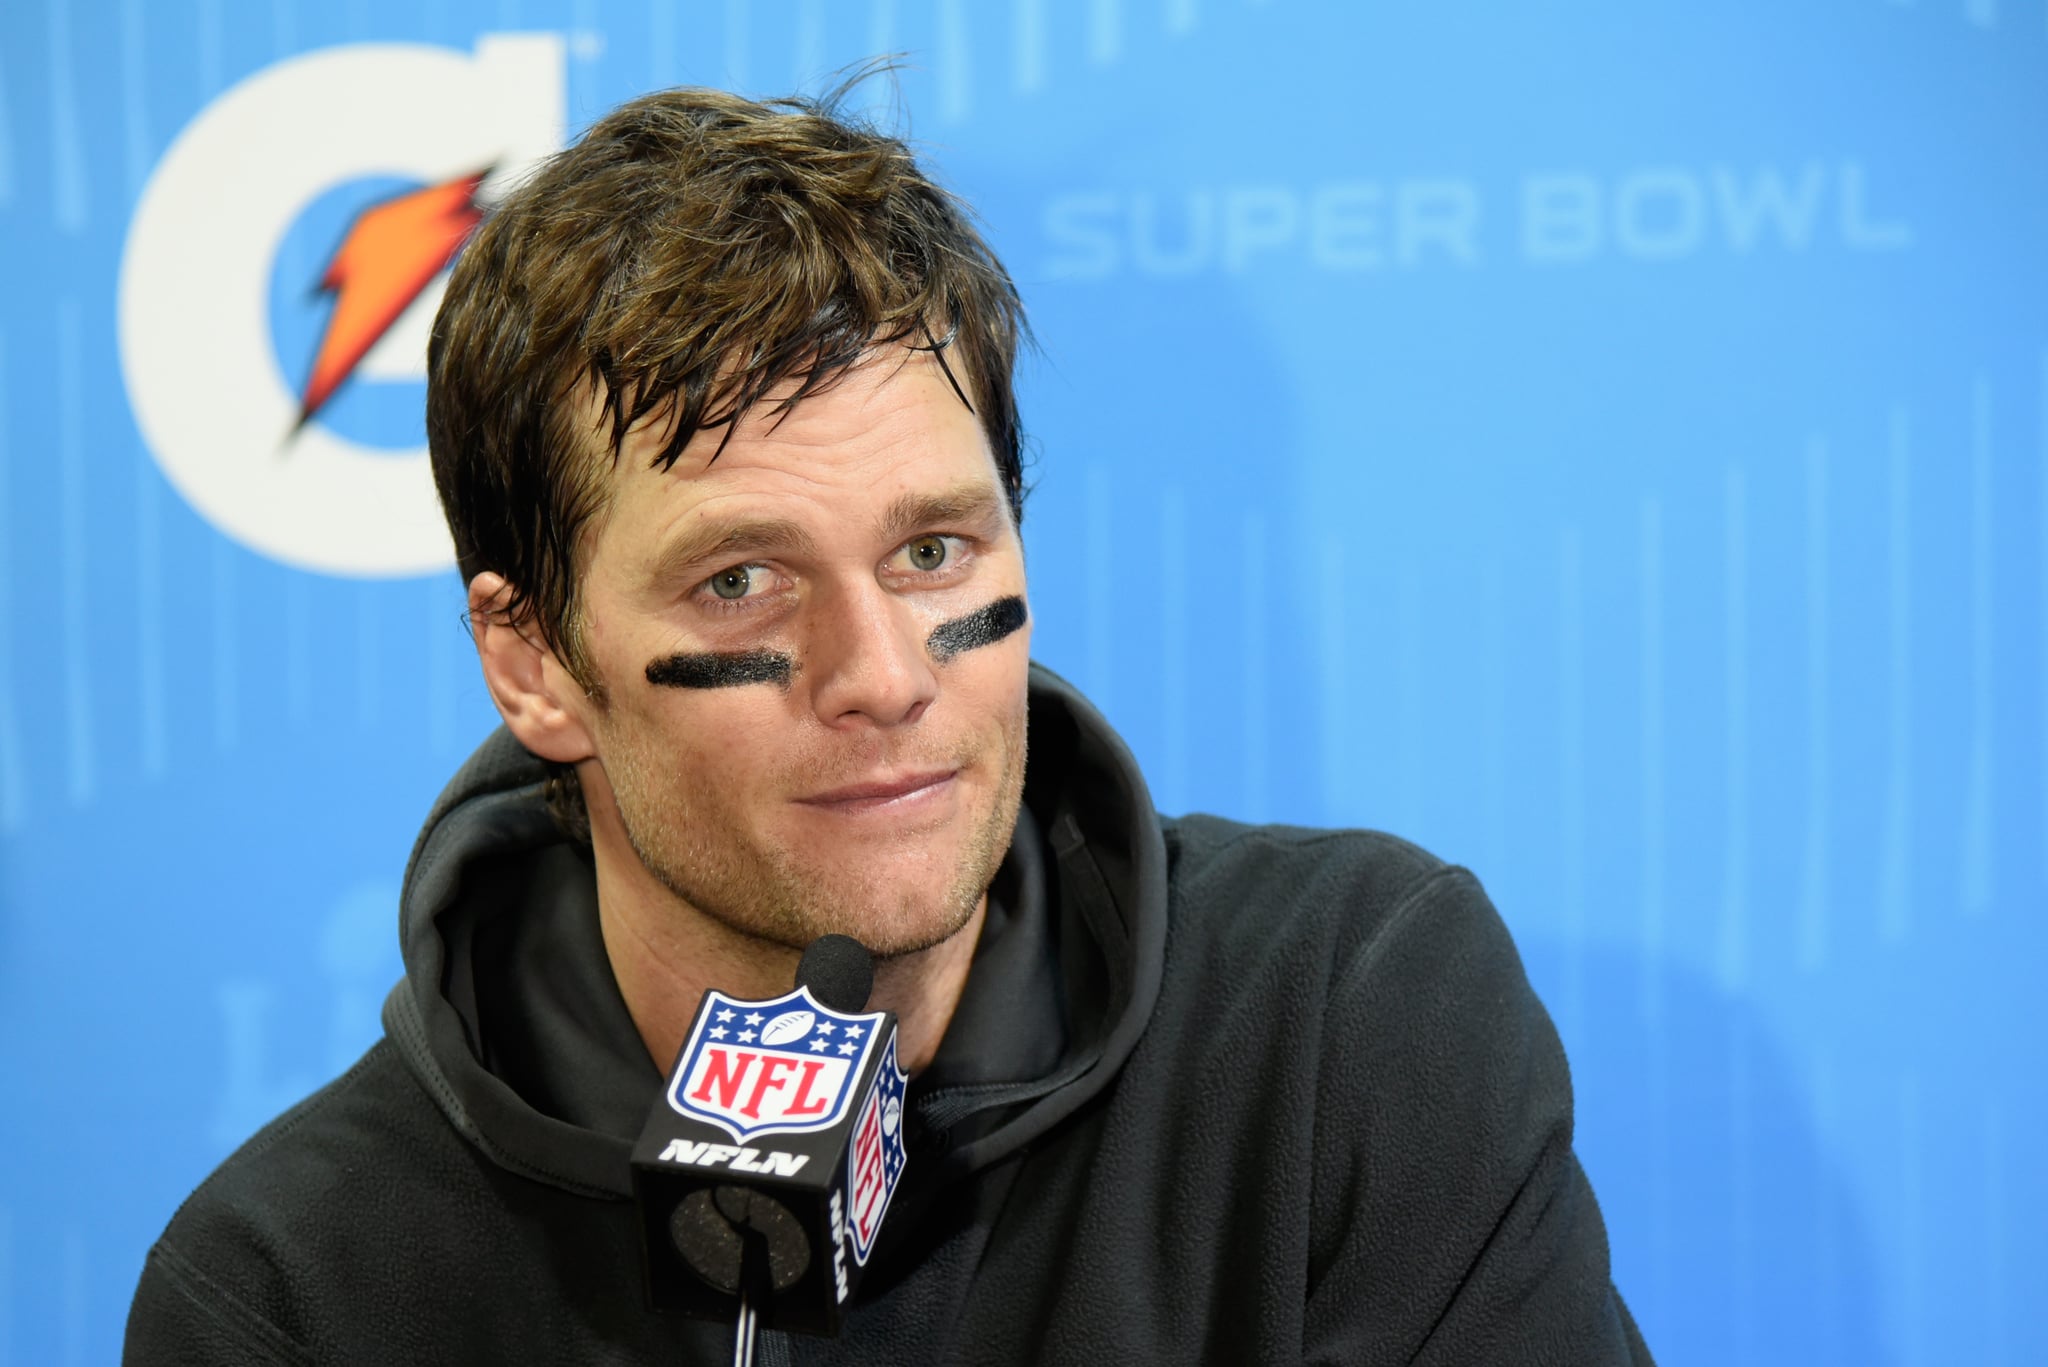 MINNEAPOLIS, MN - FEBRUARY 04:  Tom Brady #12 of the New England Patriots speaks to the media after losing 41-33 to the Philadelphia Eagles in Super Bowl LII at U.S. Bank Stadium on February 4, 2018 in Minneapolis, Minnesota.  (Photo by Larry Busacca/Getty Images)